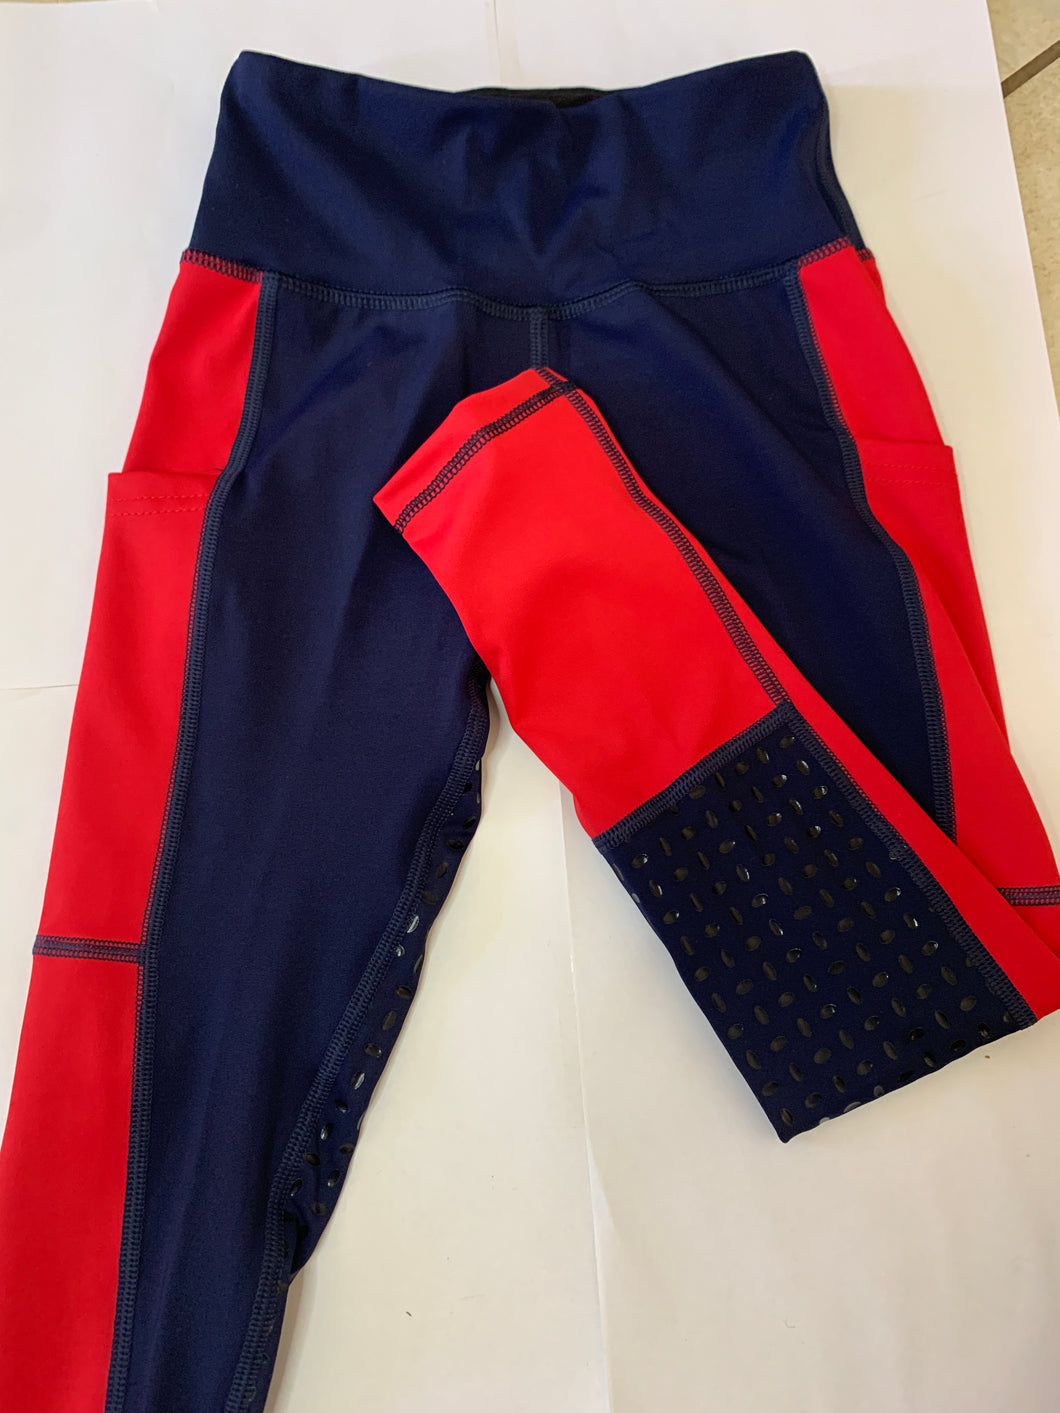 Child’s navy and red tights